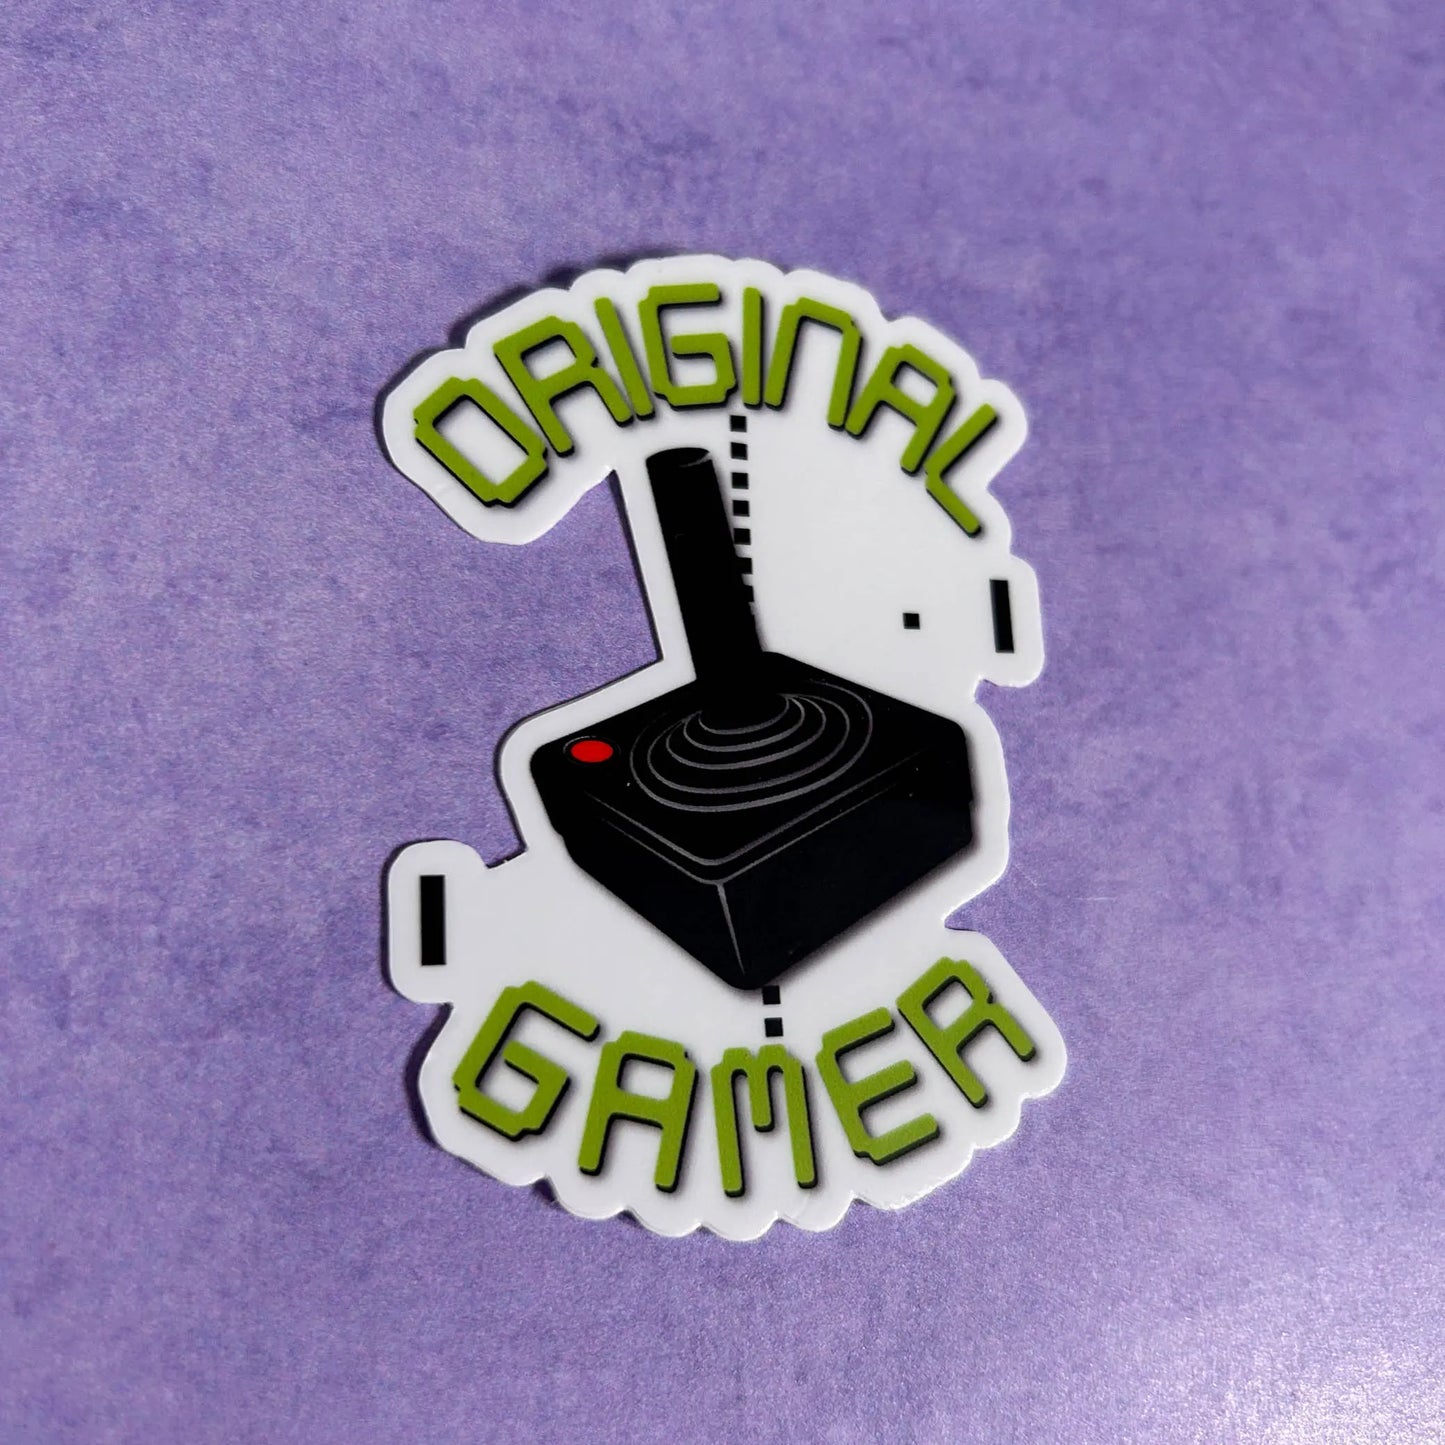 Original Gamer 3" Die-Cut Vinyl Sticker tilted to the right on a purple background